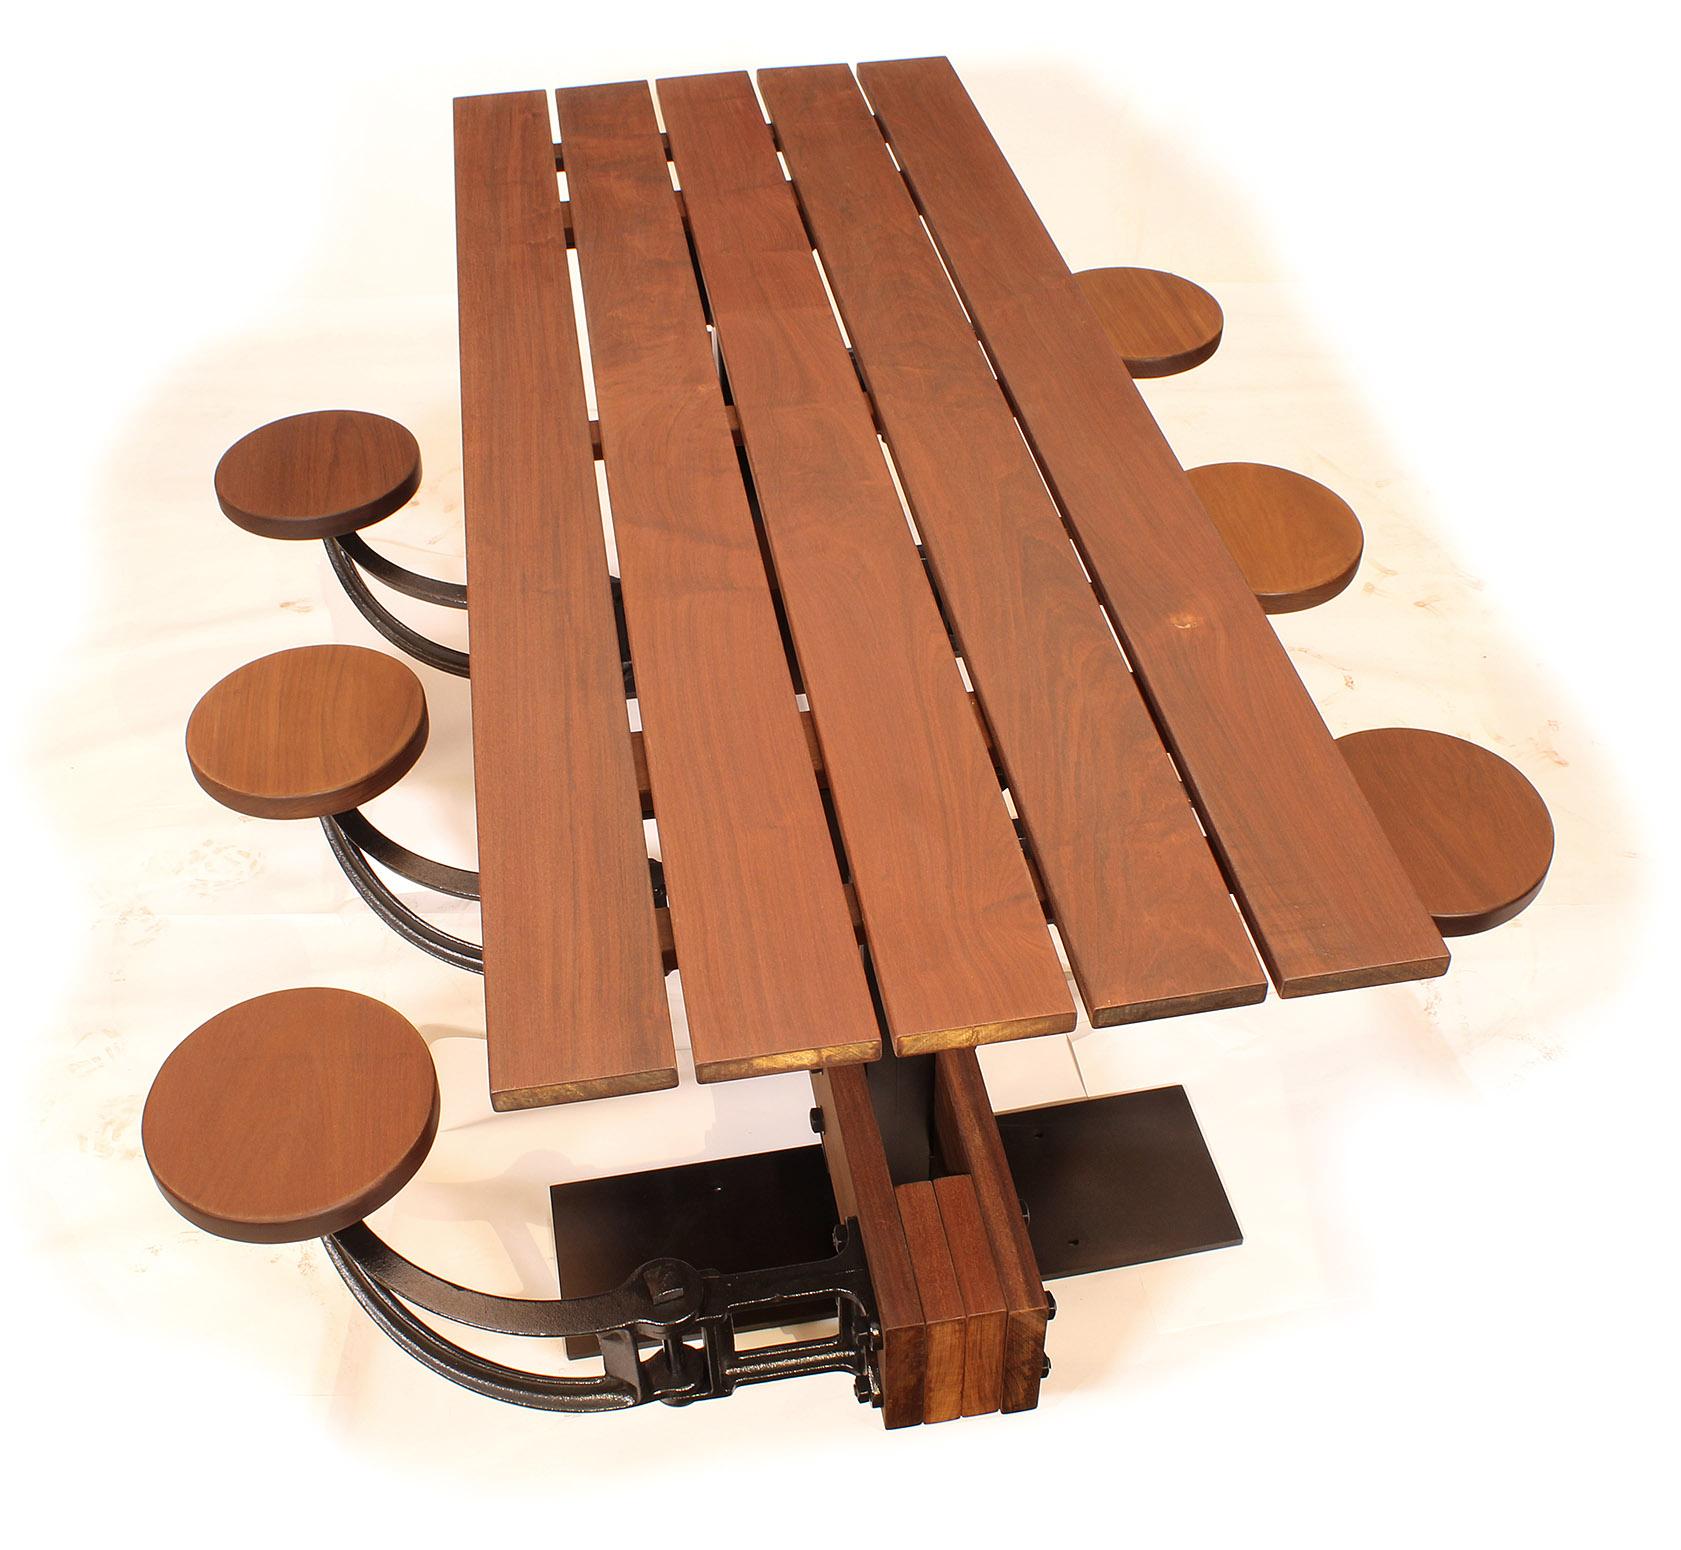 American Industrial Swing-Out-Seat Outdoor Dining Table For Sale